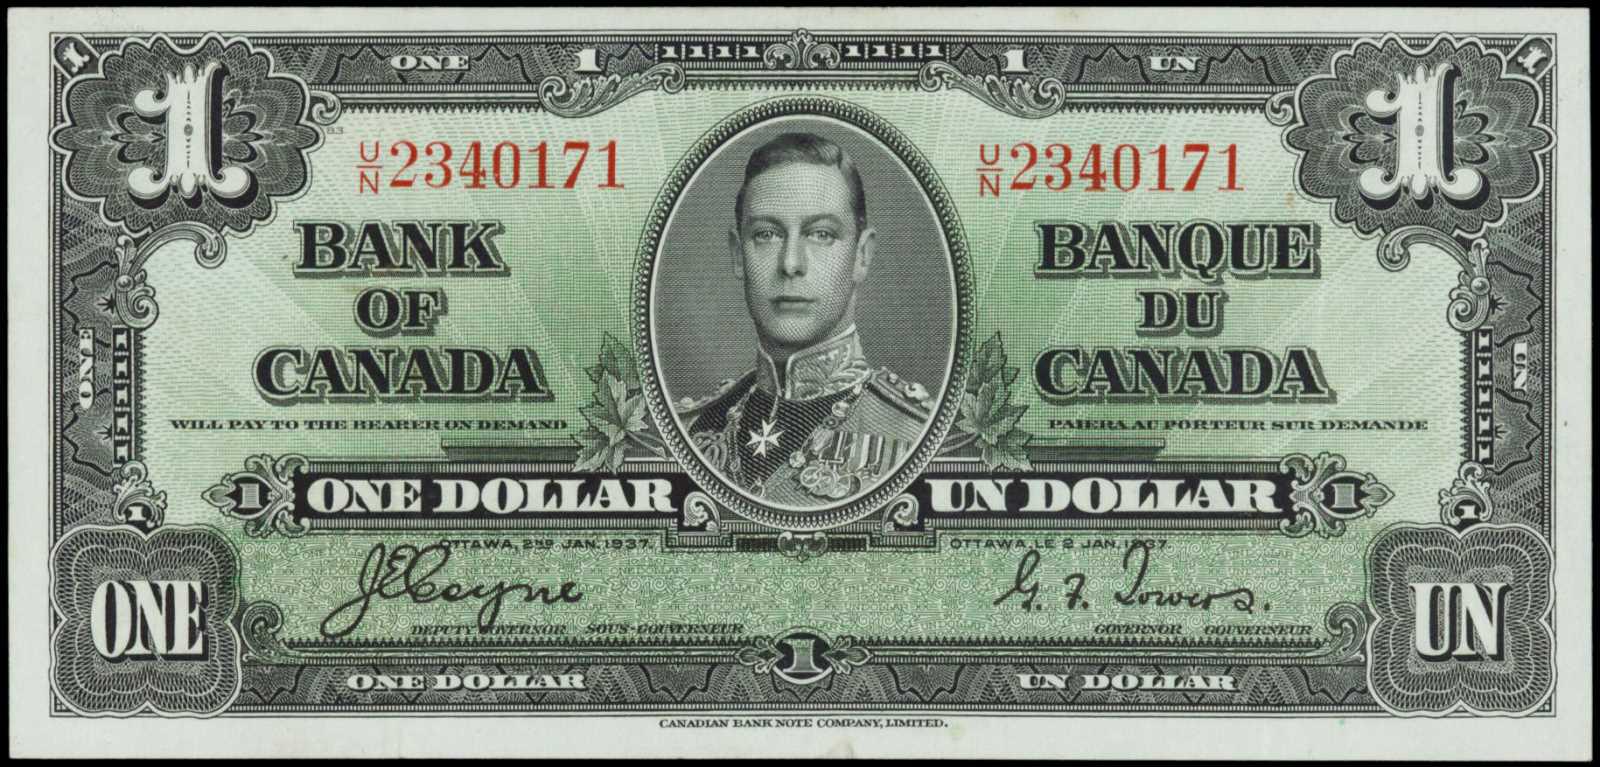 Value Of 2nd Jan 1937 1 Bill From The Bank Of Canada Canadian